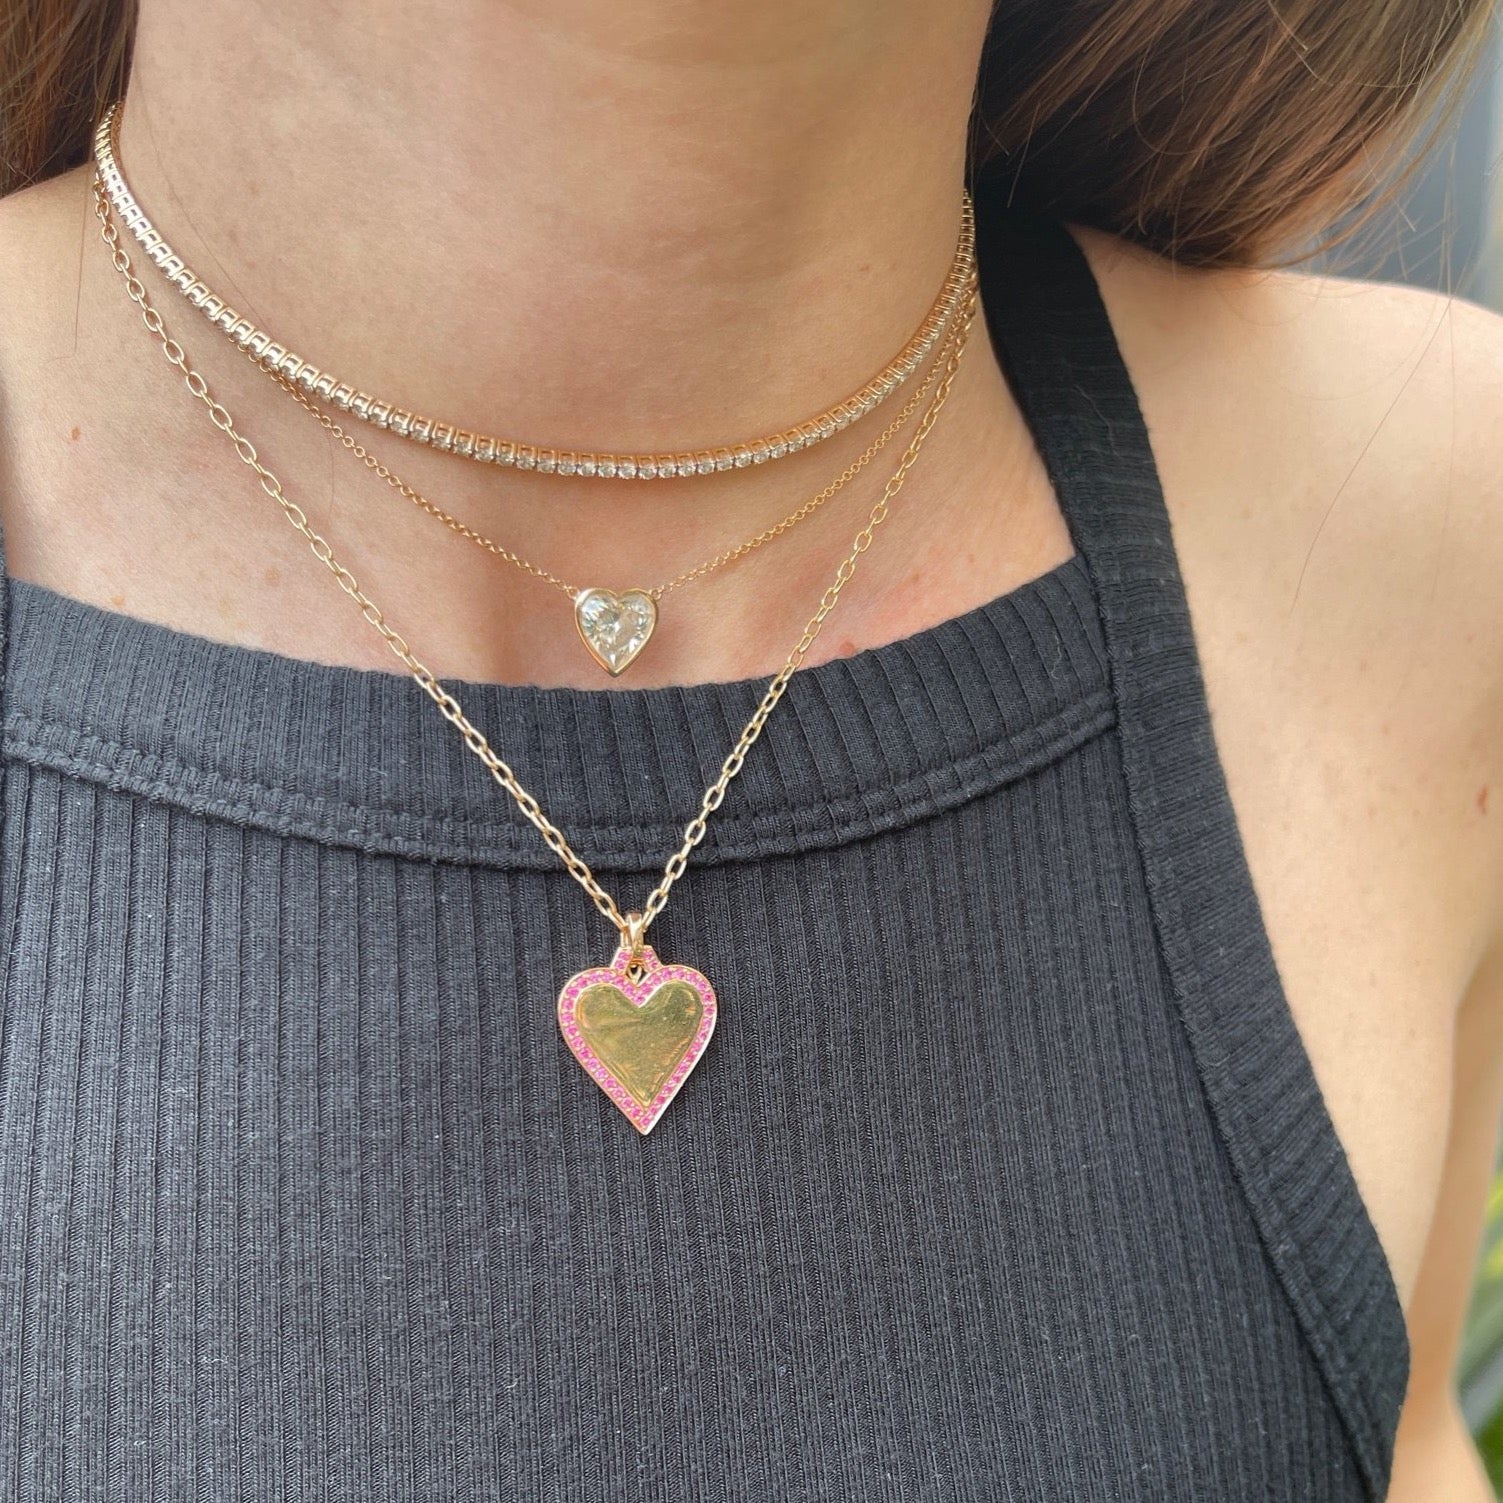 Dora Gold and Pave Edge Heart Charm